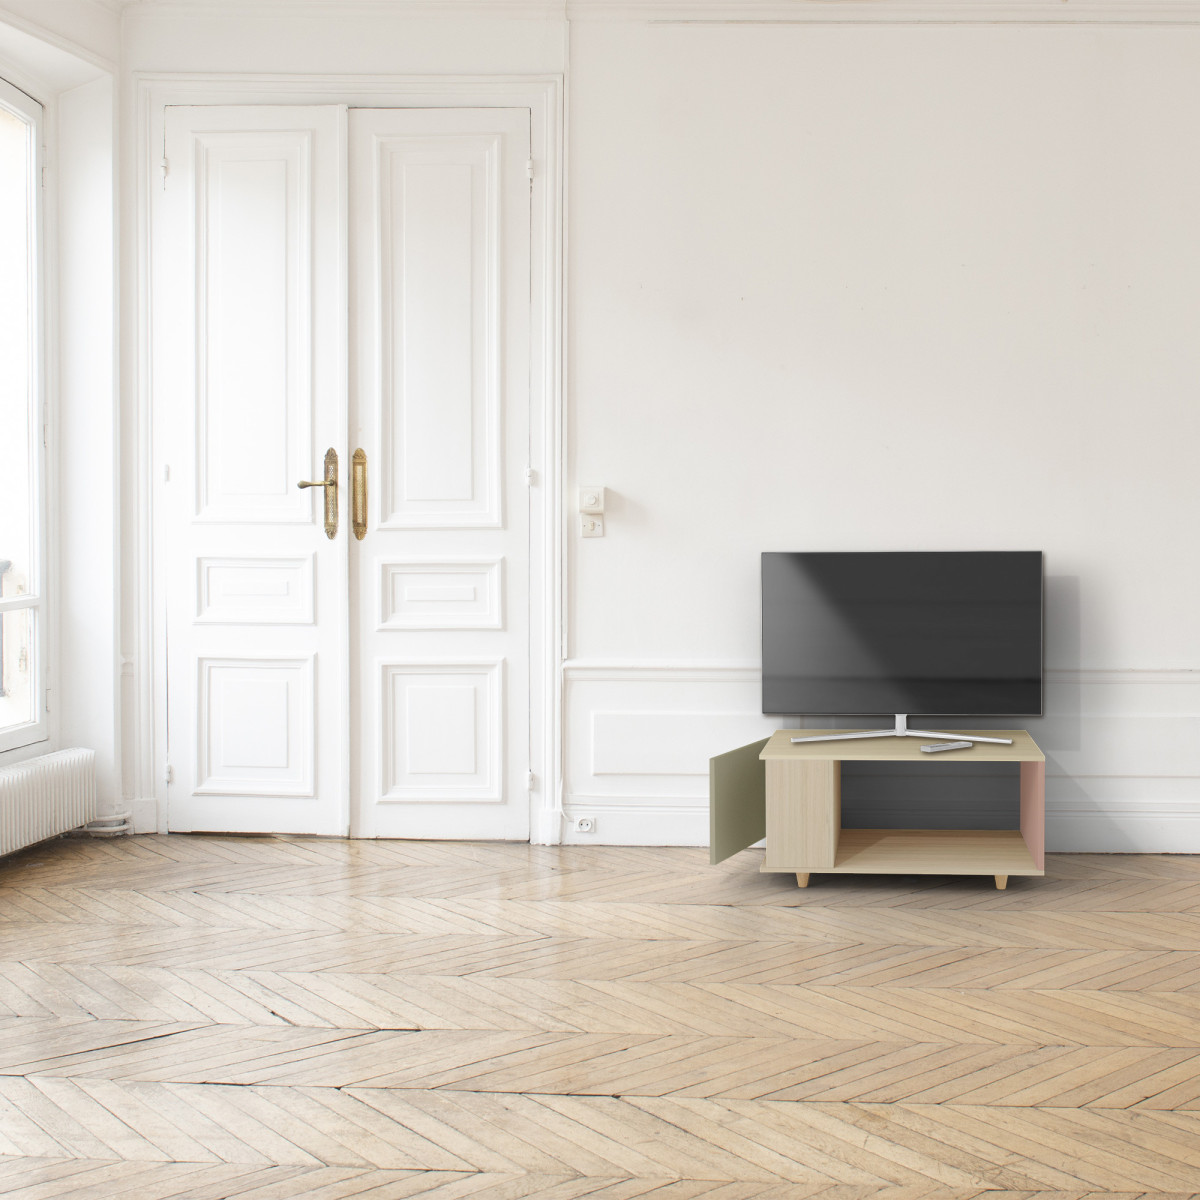 Meuble TV Chêne Clair - Olive - Abricot YZ-NXCL1362702954-OLCLAB-01-00